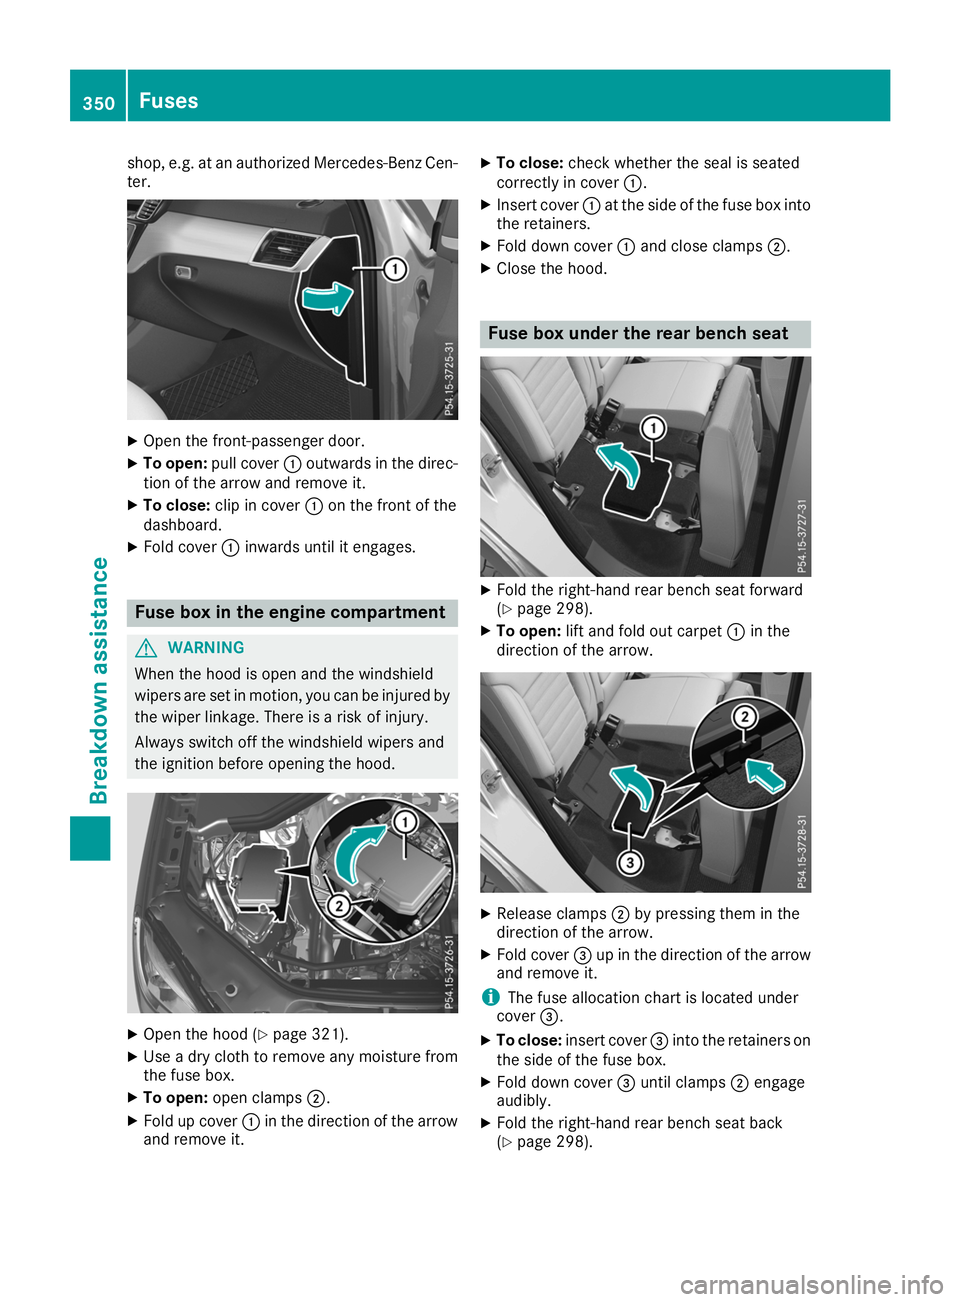 MERCEDES-BENZ GLE SUV 2019  Owners Manual shop, e.g. at an authorized Mercedes-Benz Cen-
ter. X
Open the front-passenger door.
X To open: pull cover 0043outwards in the direc-
tion of the arrow and remove it.
X To close: clip in cover 0043on 